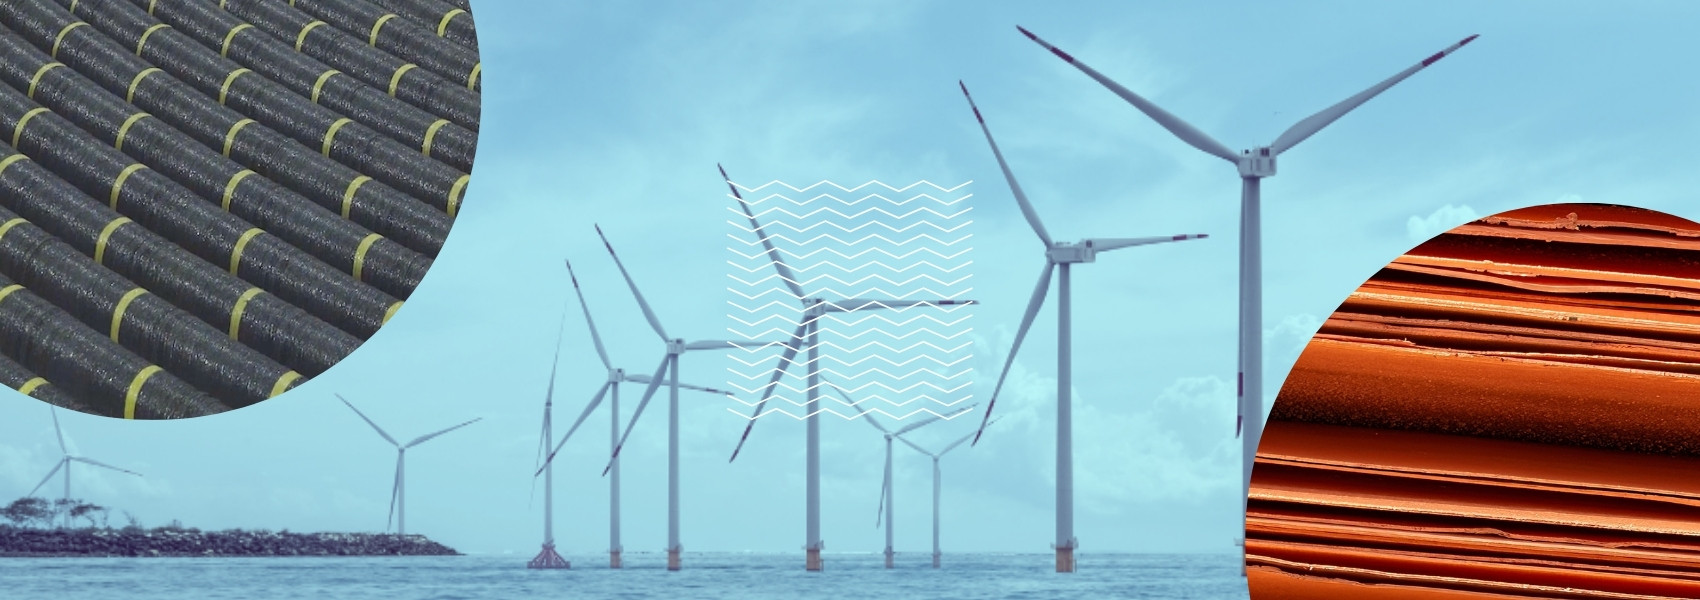 Offshore wind farm with focus on subsea cables and copper